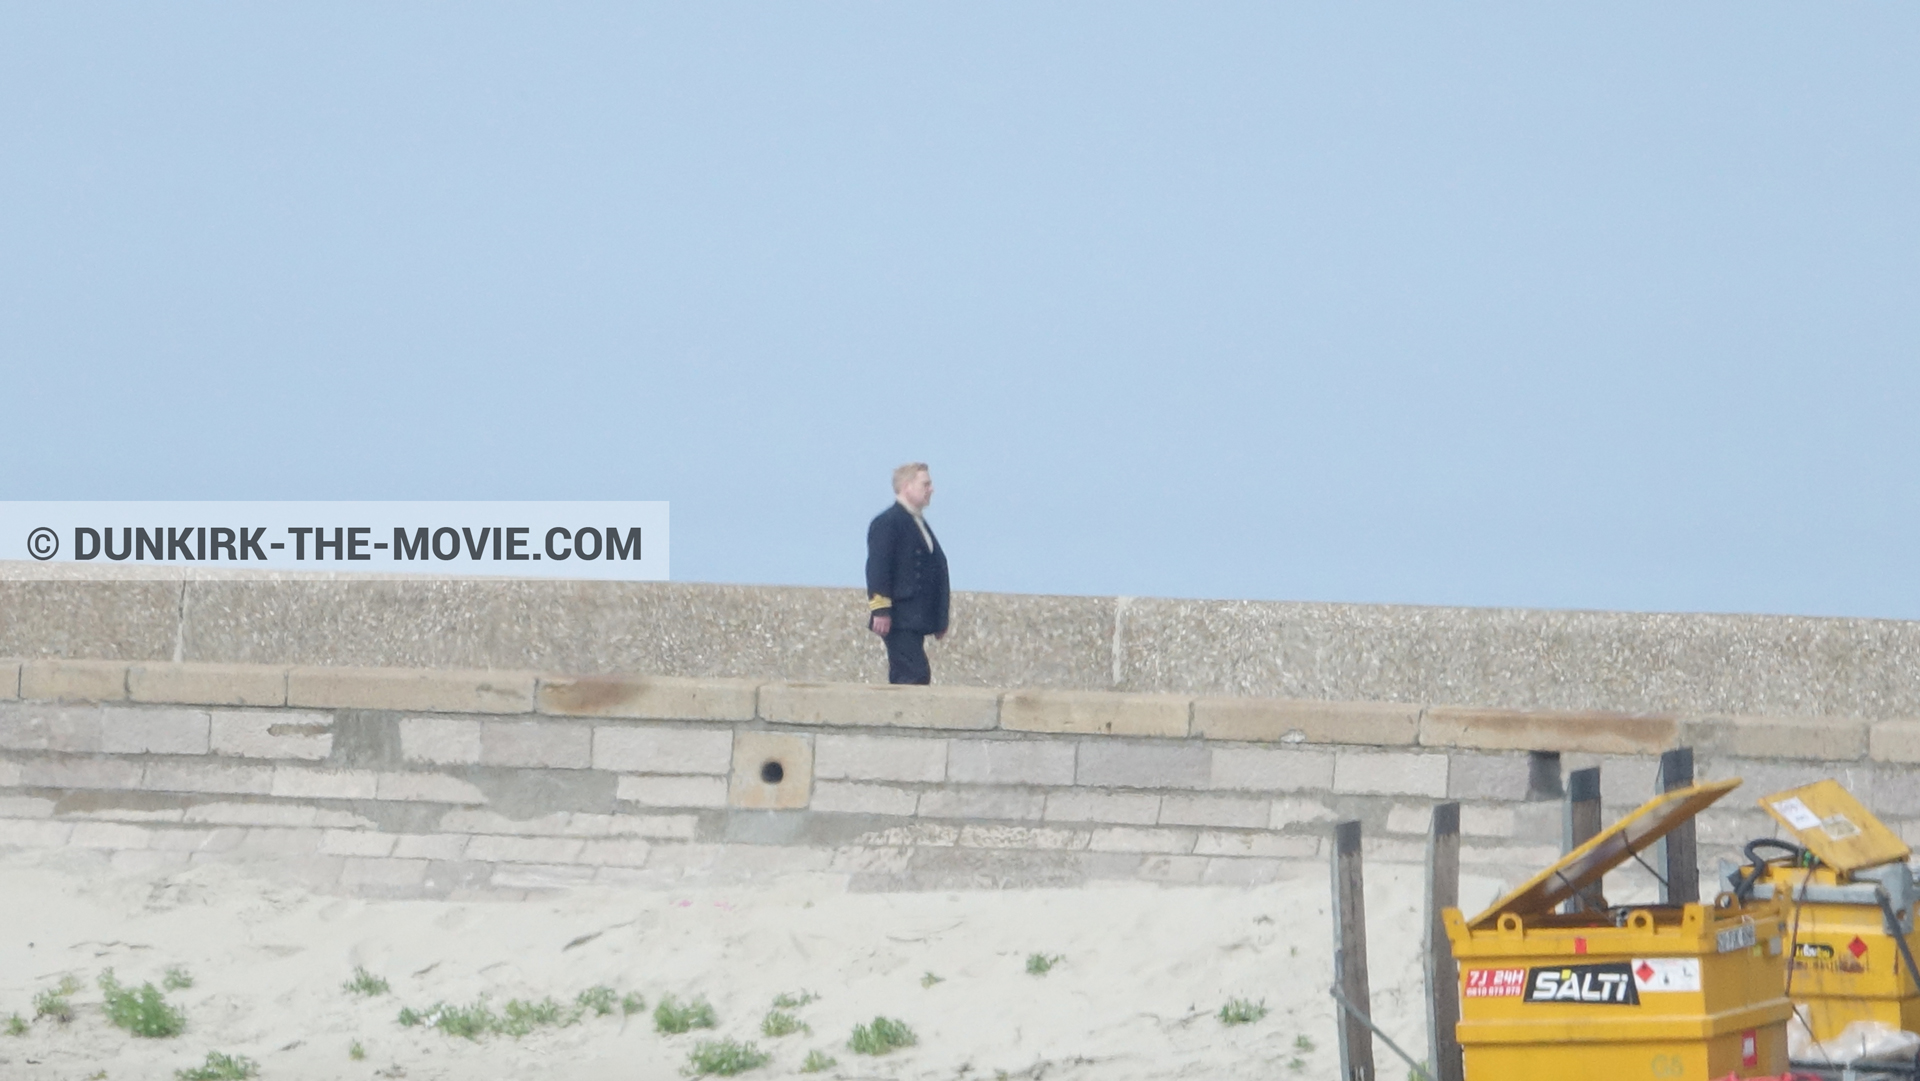 Picture with EST pier, Kenneth Branagh,  from behind the scene of the Dunkirk movie by Nolan